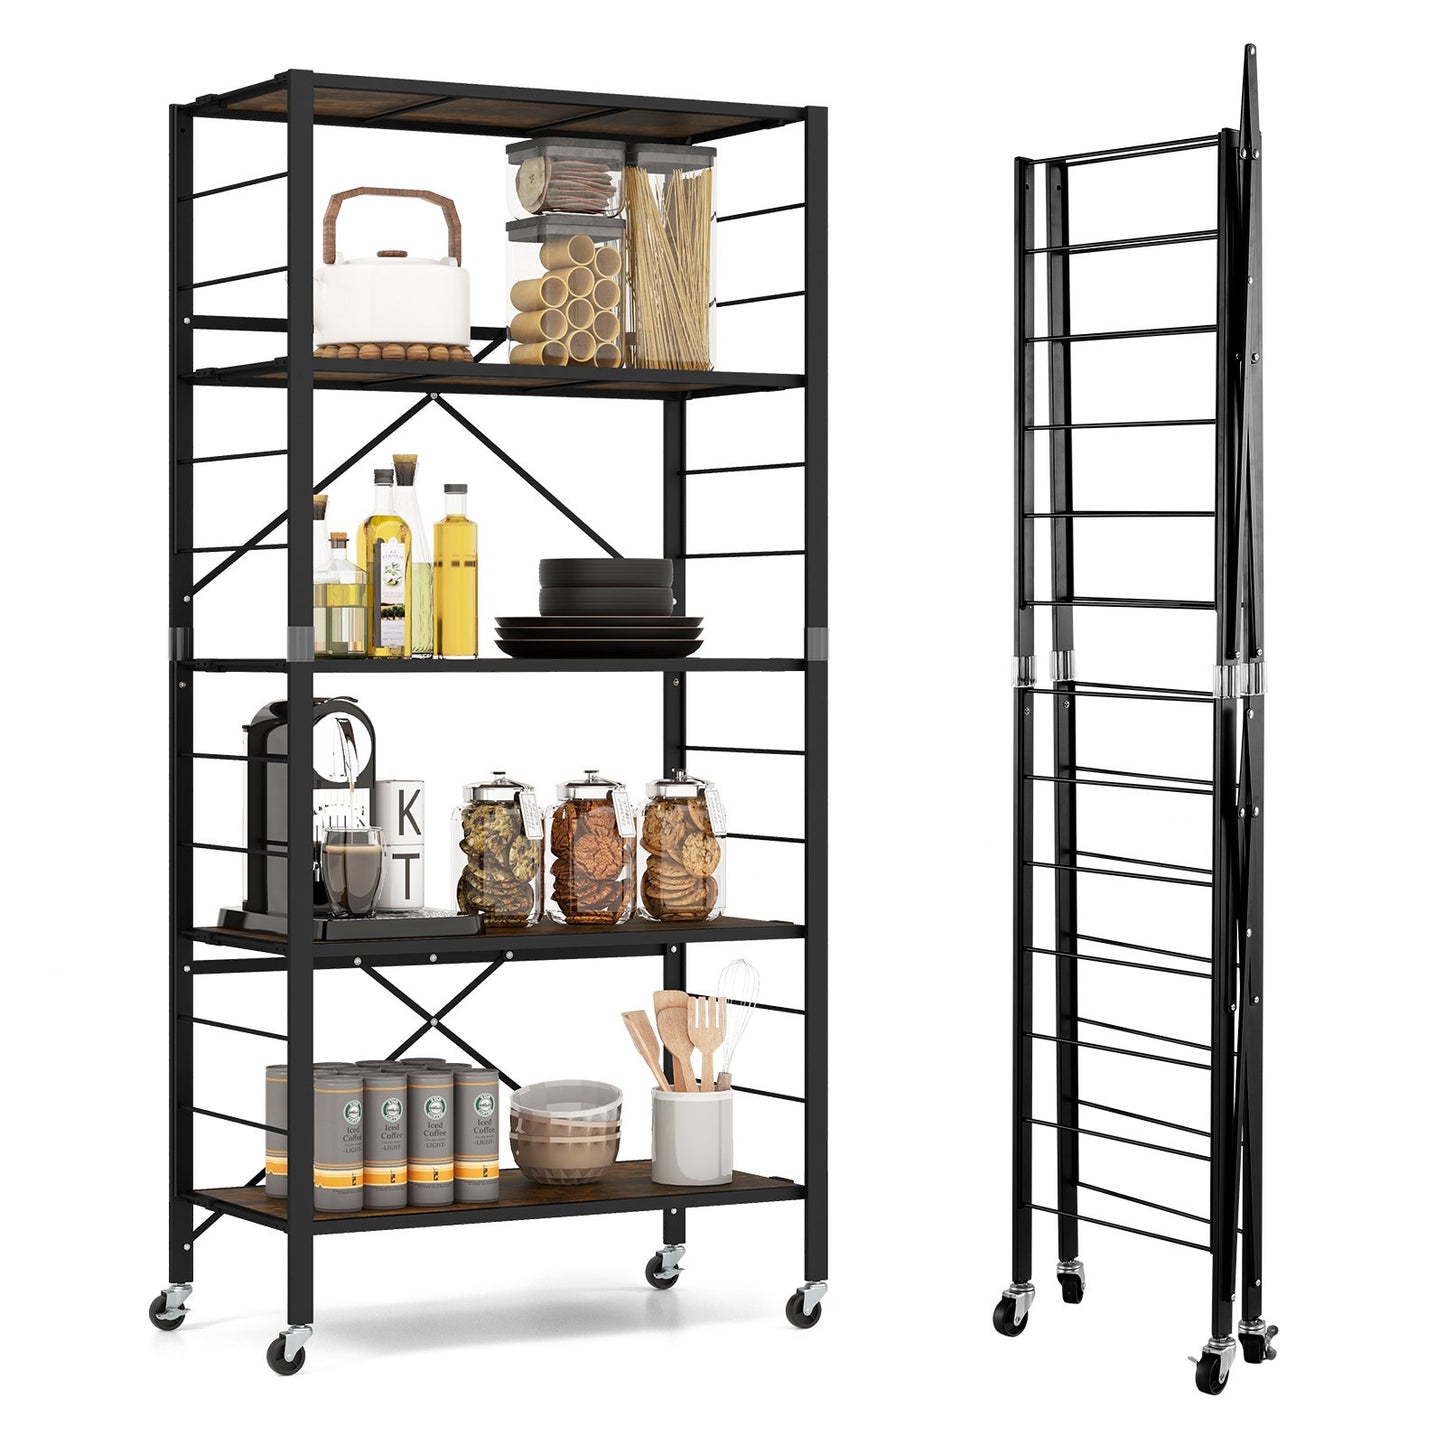 5-Tier Foldable Shelving Unit with Detachable Wheels and Anti-Toppling System, Black